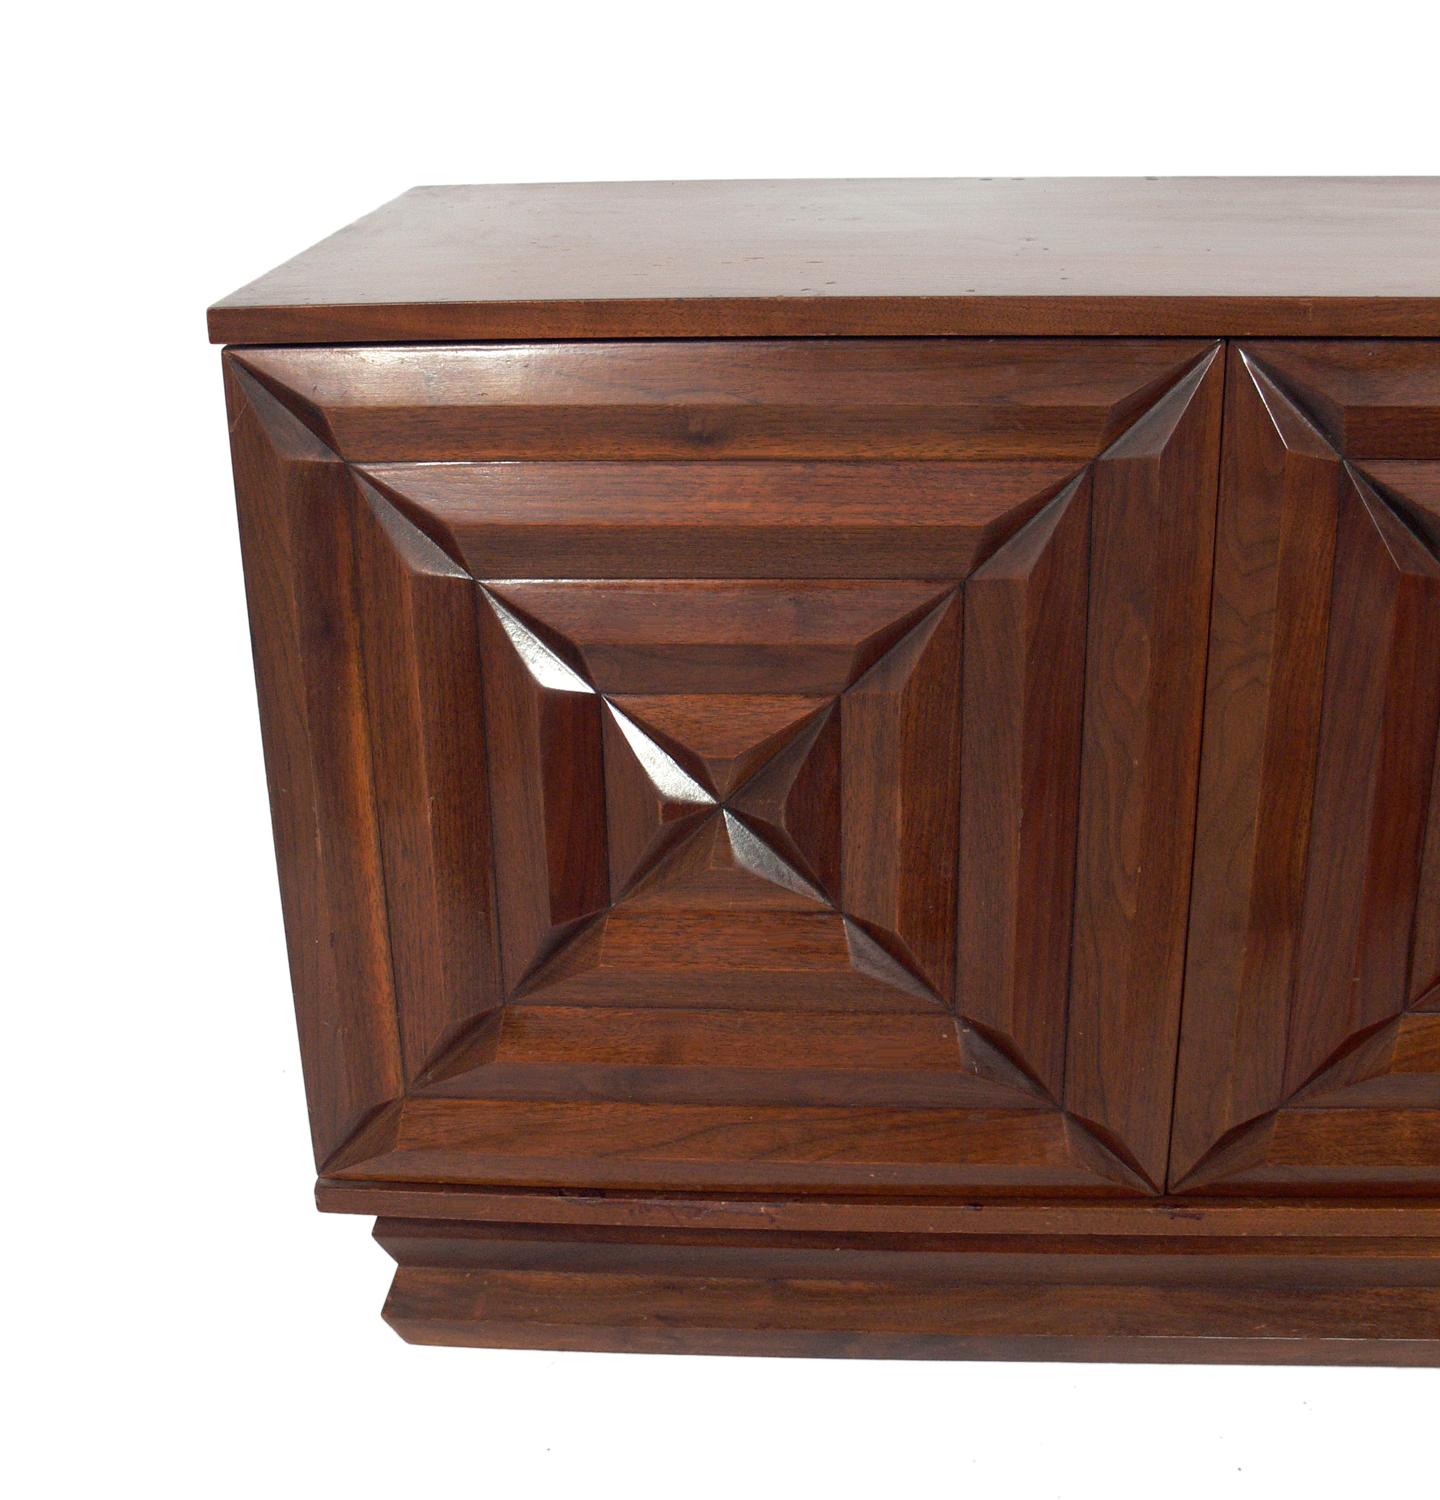 American Midcentury Walnut Credenza with Geometric Carved Doors